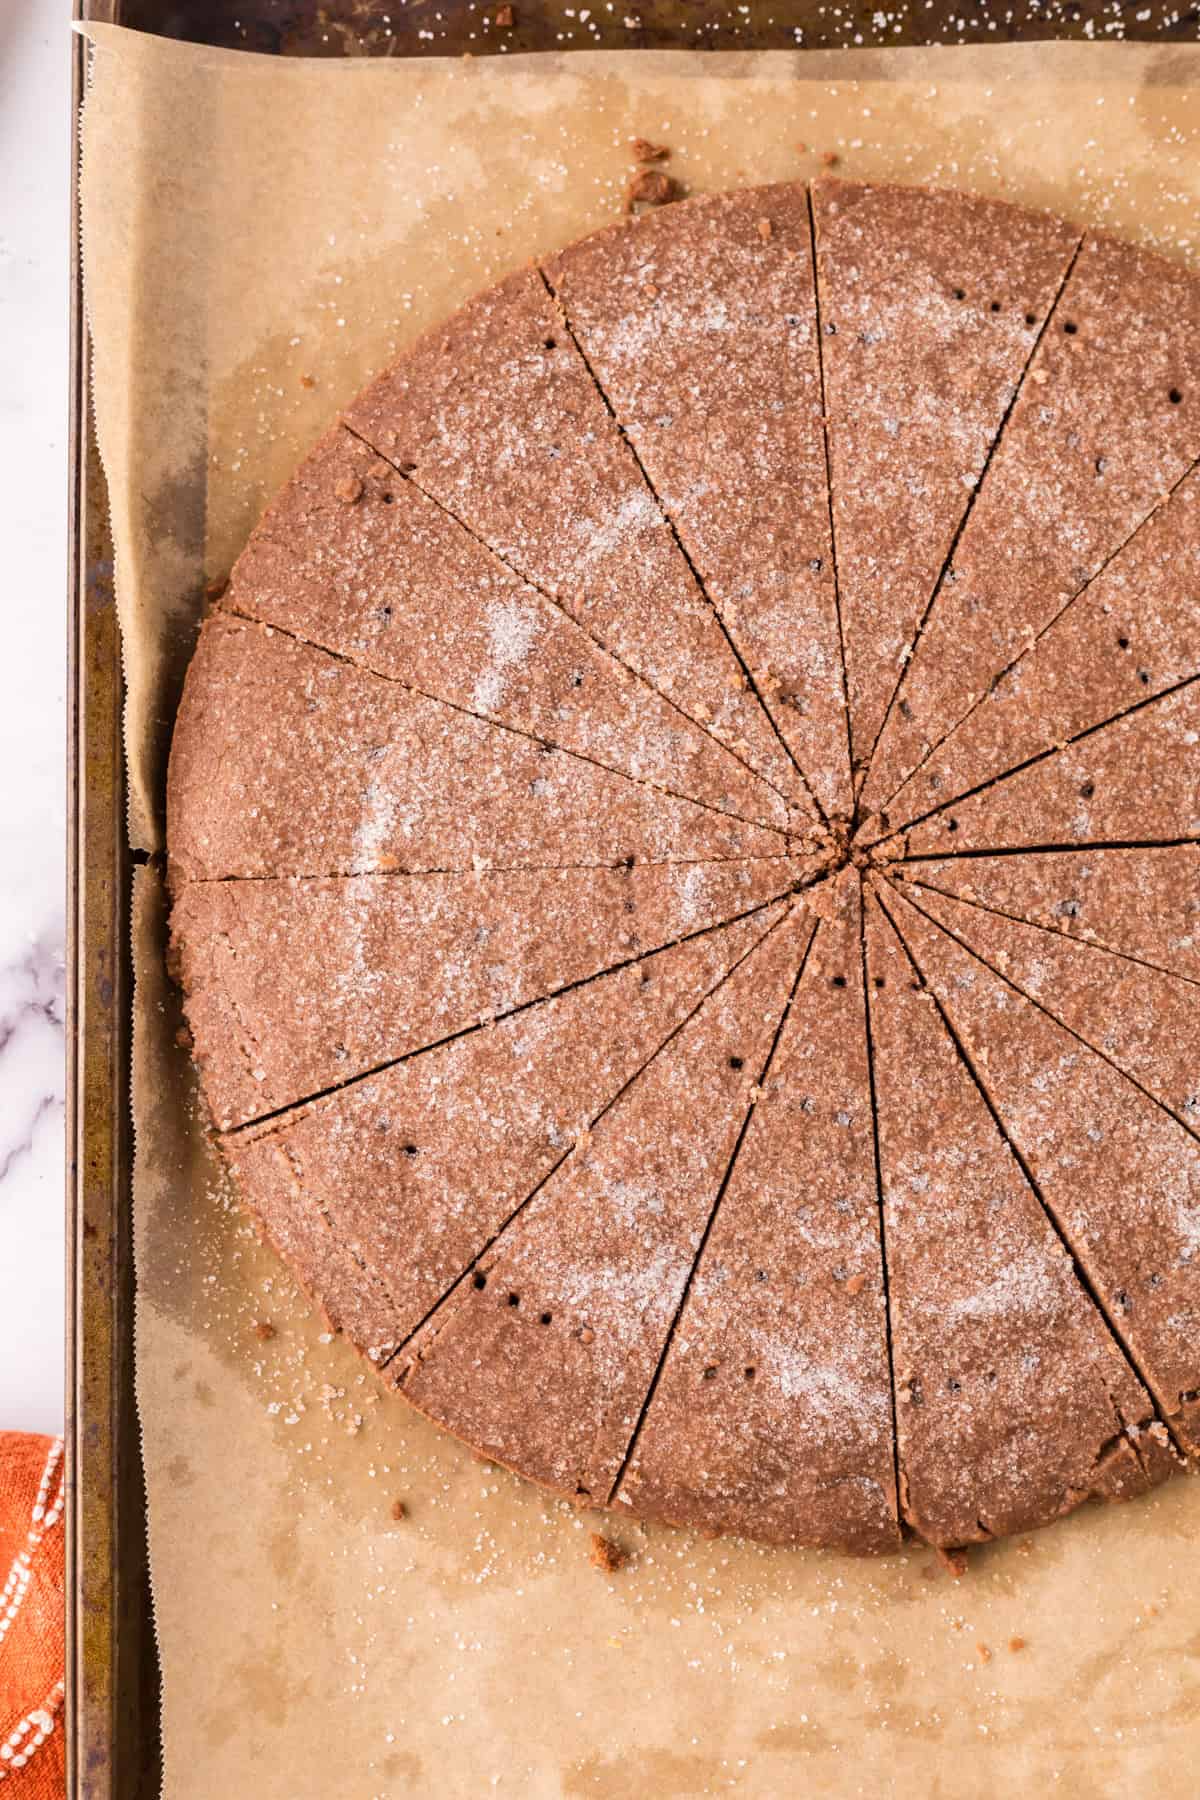 baking sheet with parchment and a delicious baked round chocolate shortbread.